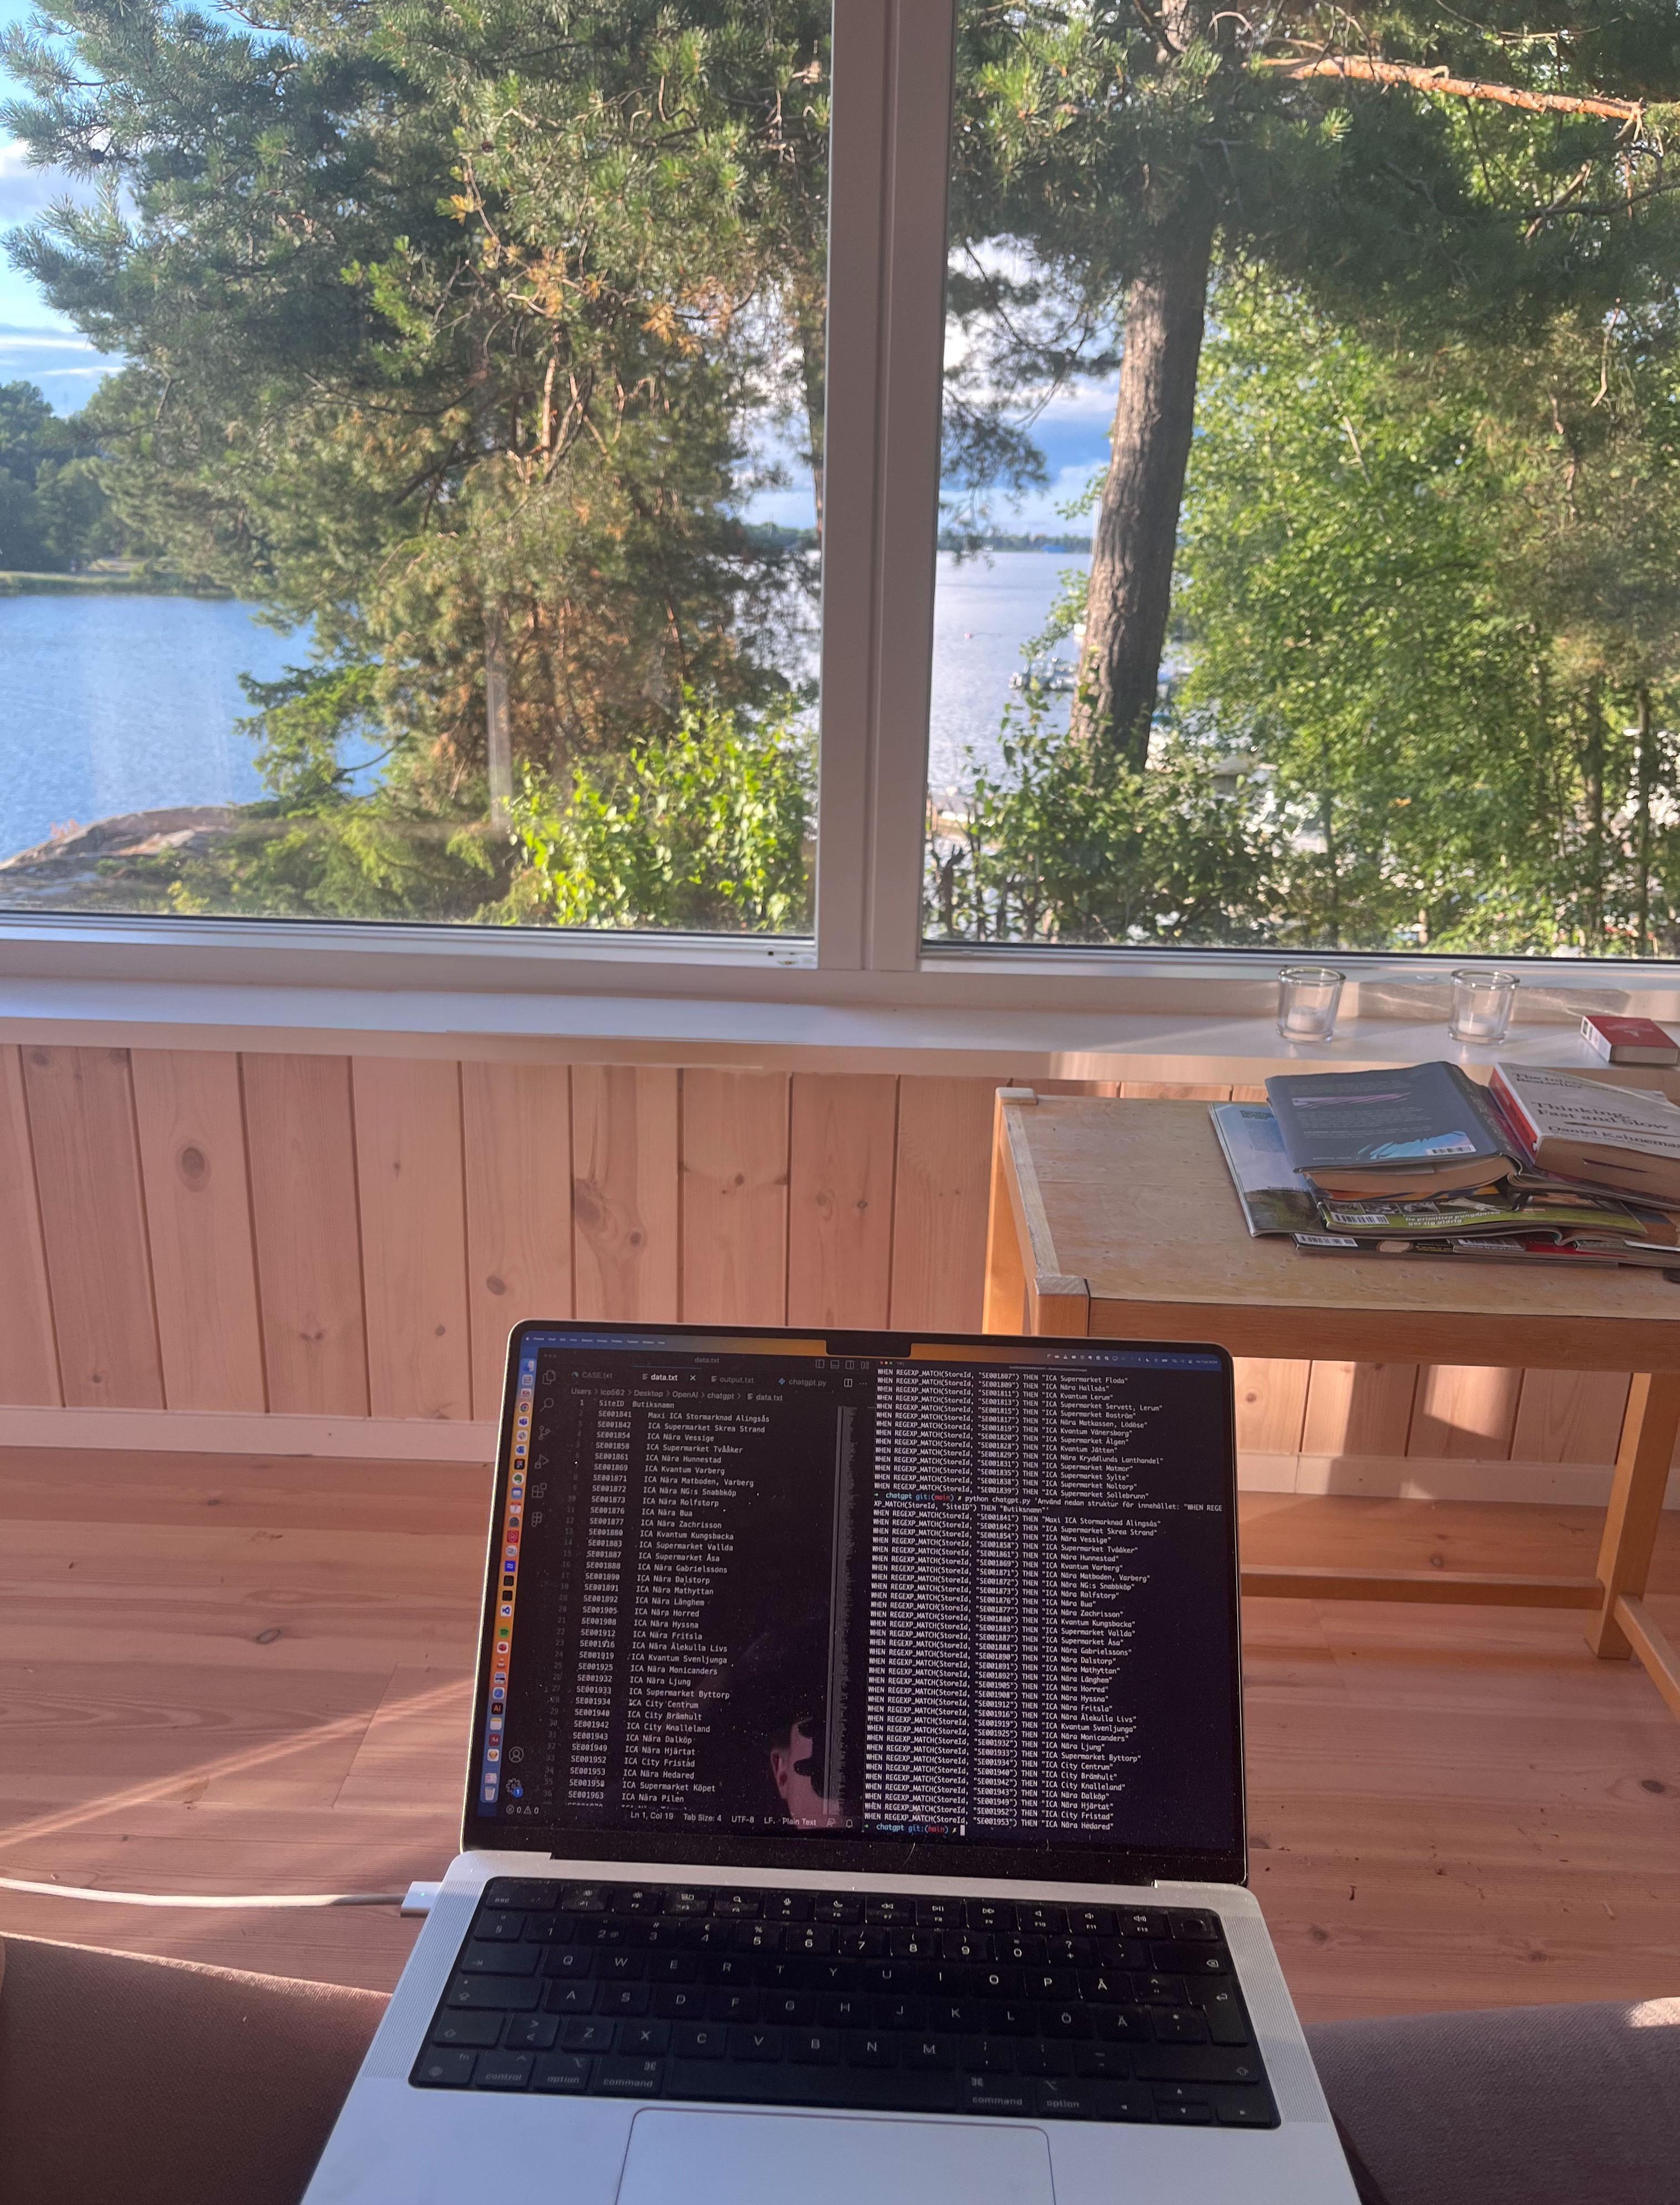 A laptop open on a table in front of a window with a view of a lake and trees.